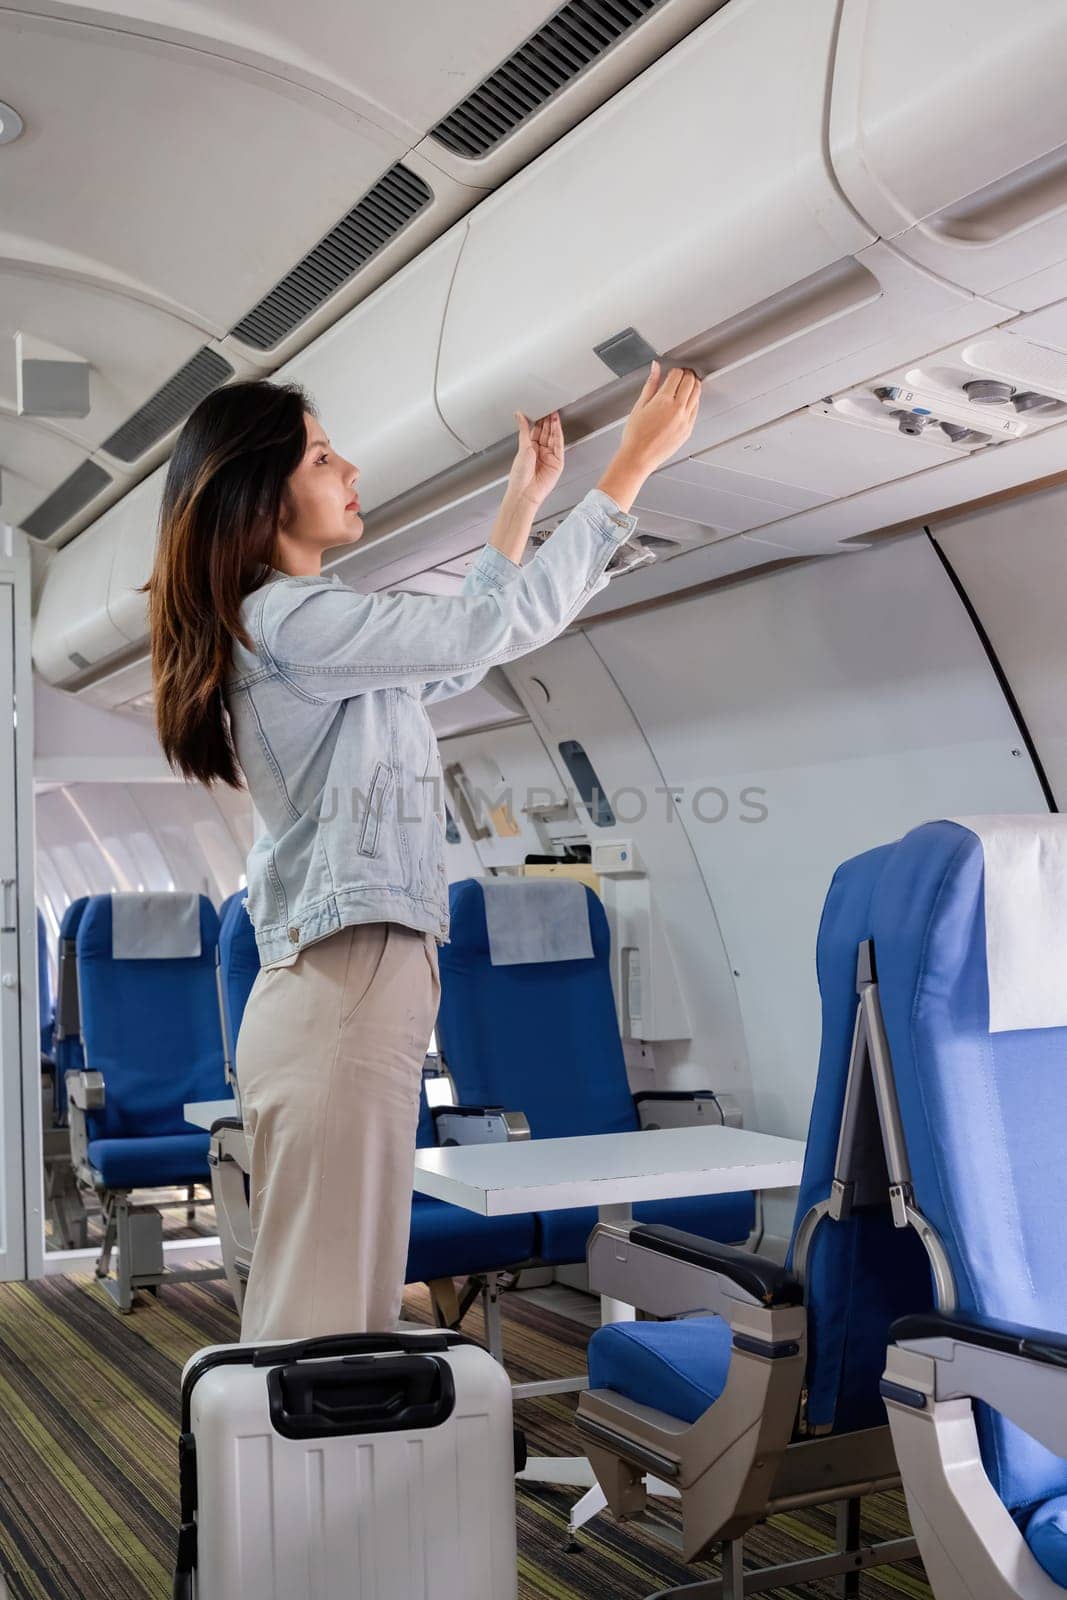 Asian woman storing luggage in airplane overhead bin. Concept of travel, preparation, and aviation by wichayada